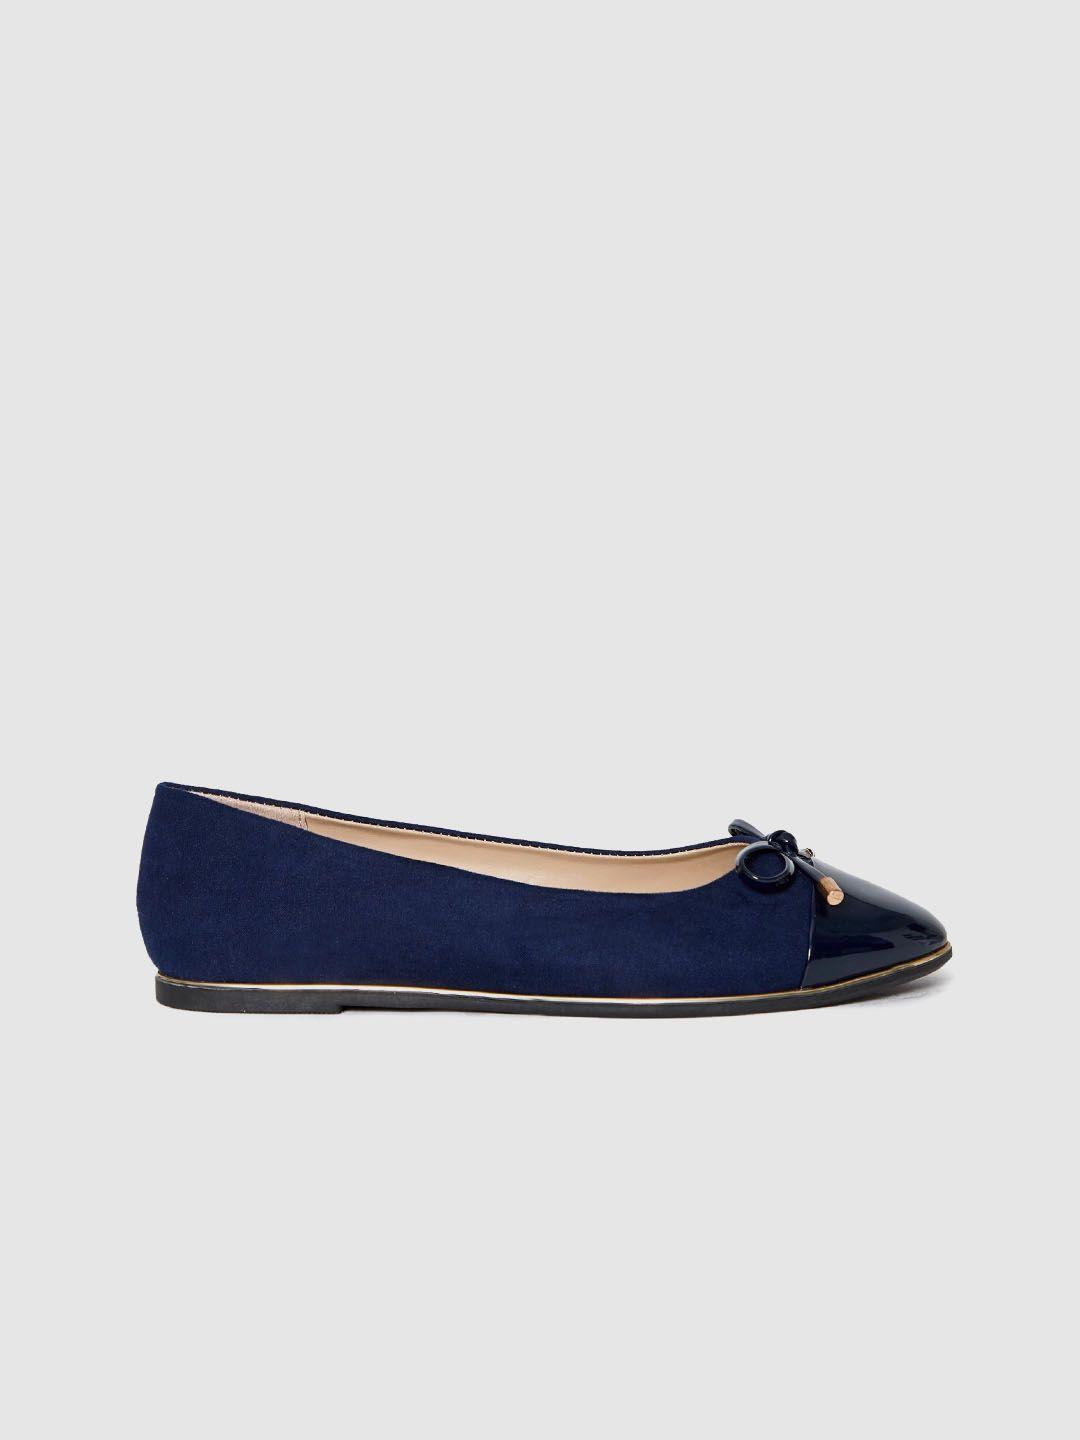 dorothy perkins women navy blue suede finish ballerinas with bow detail